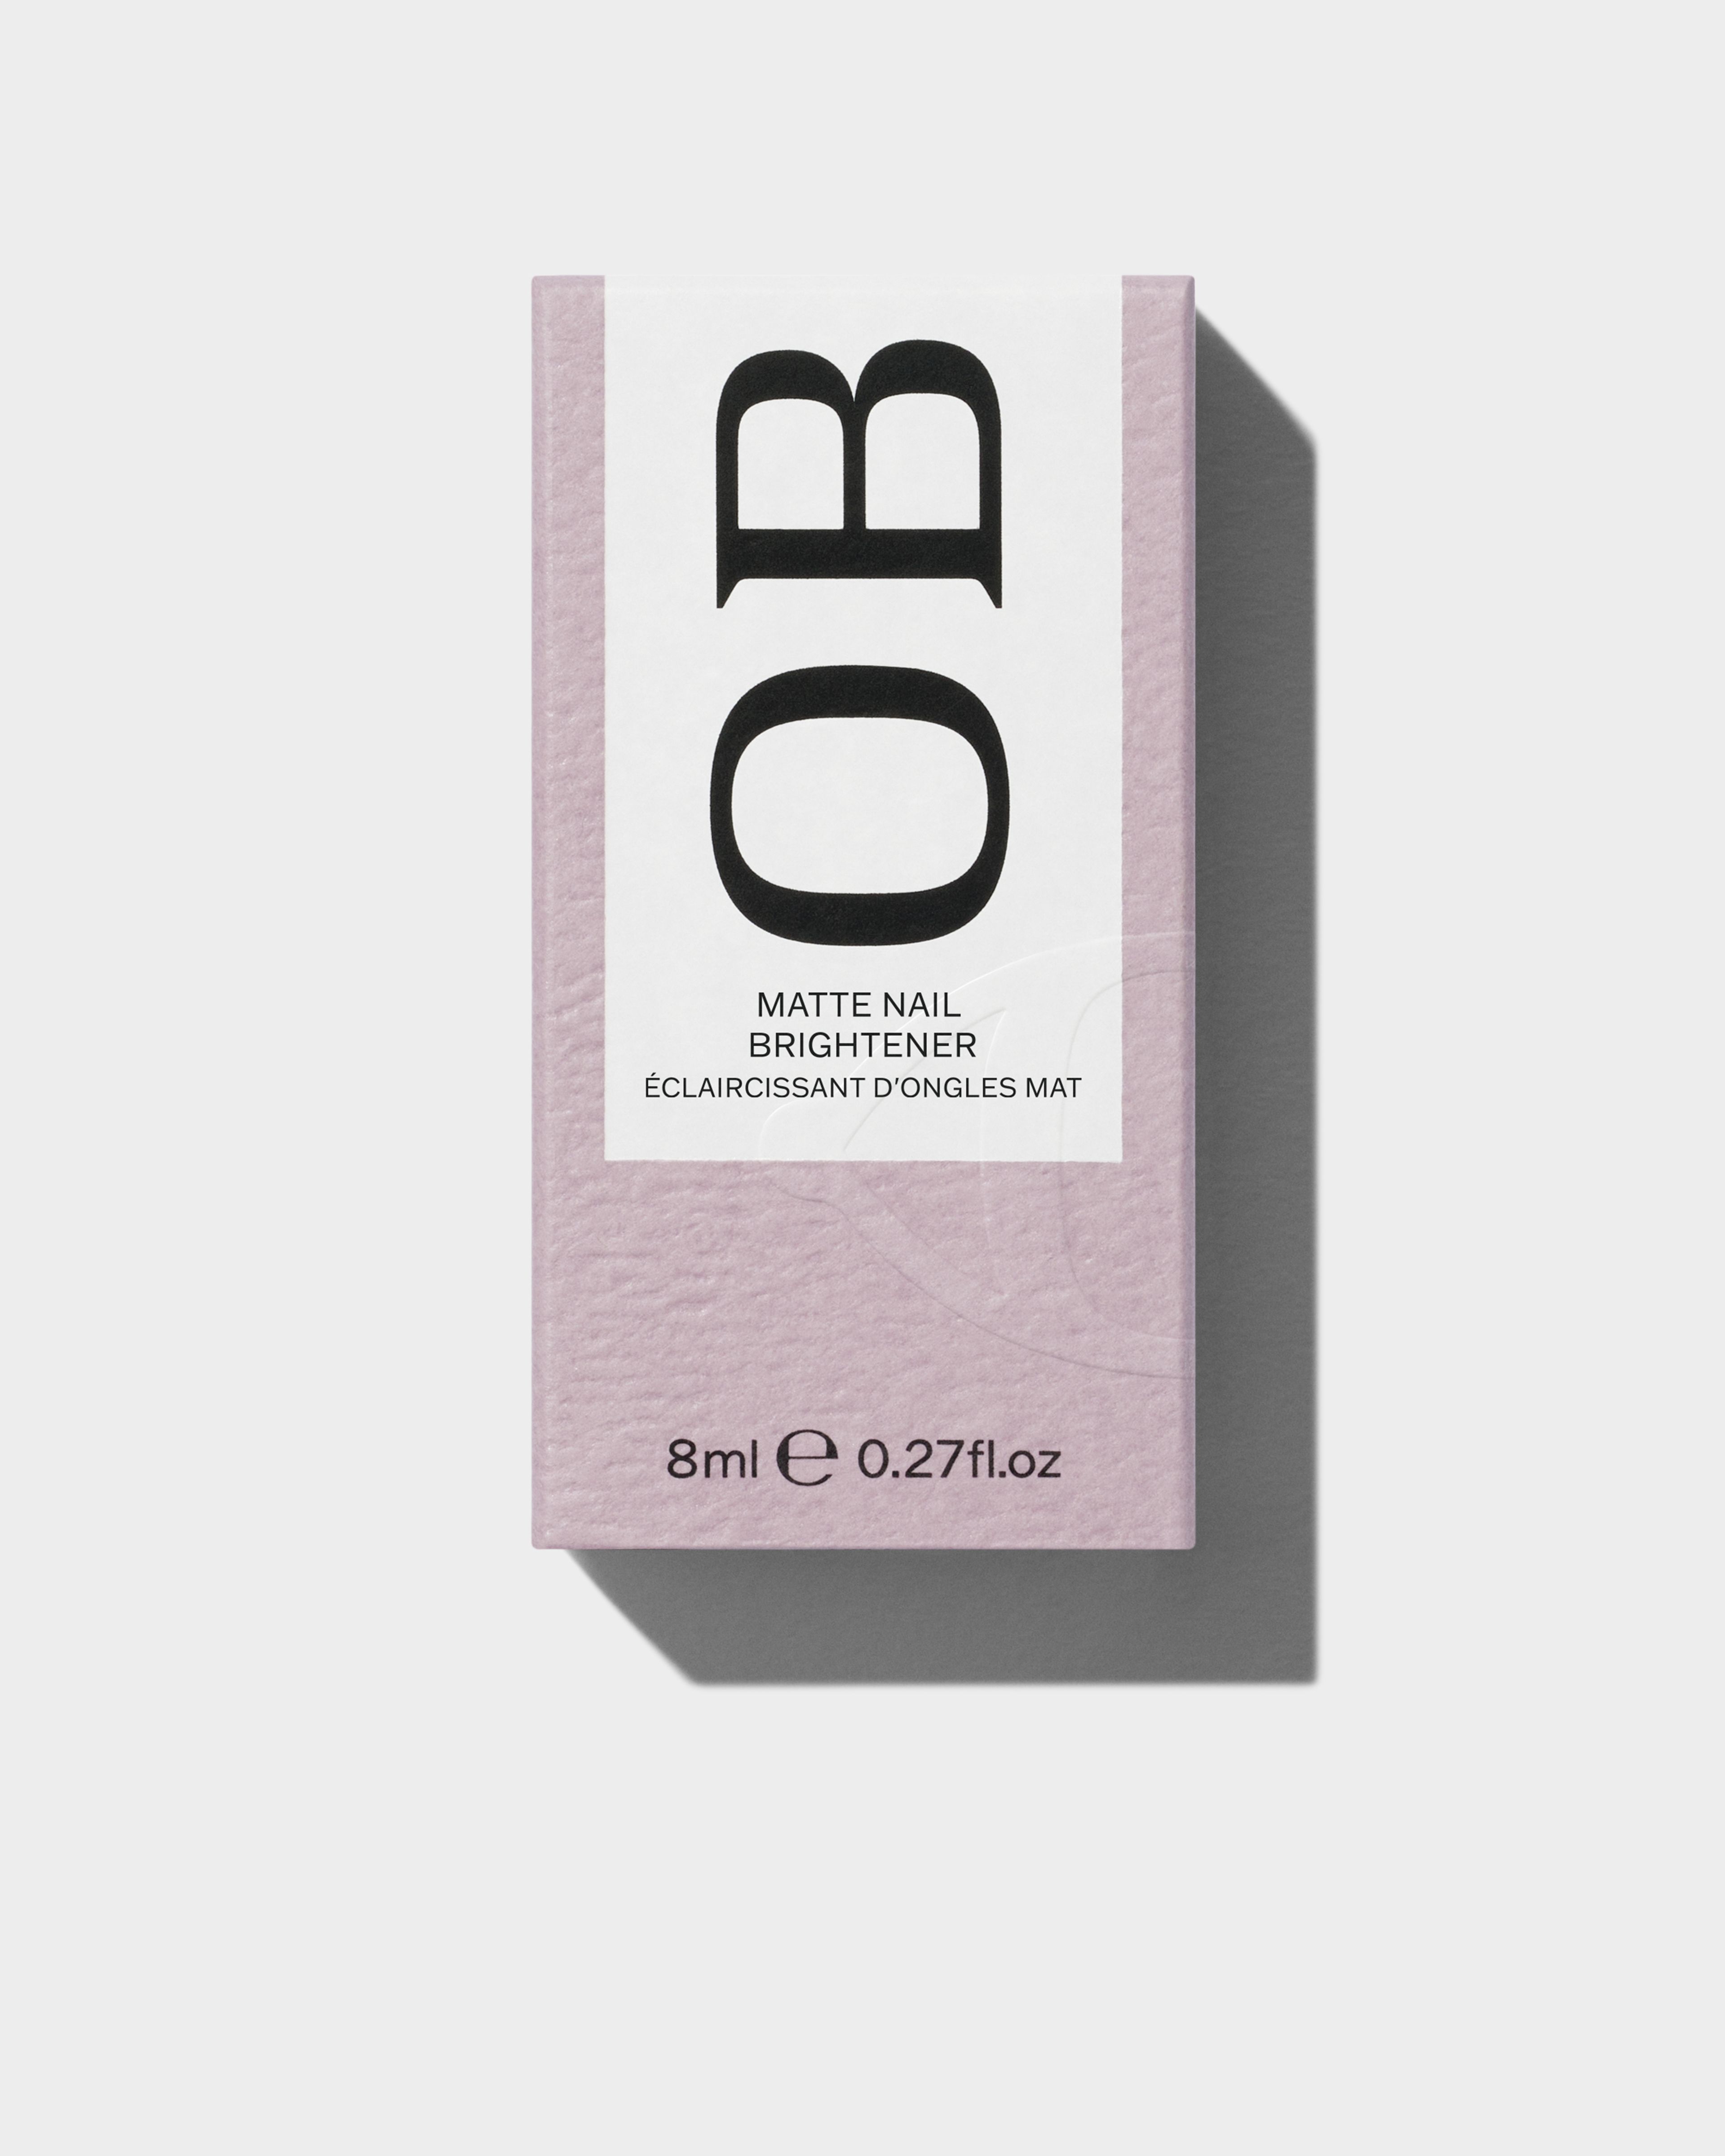 Matte Nail Brightener packaging laying on a grey surface